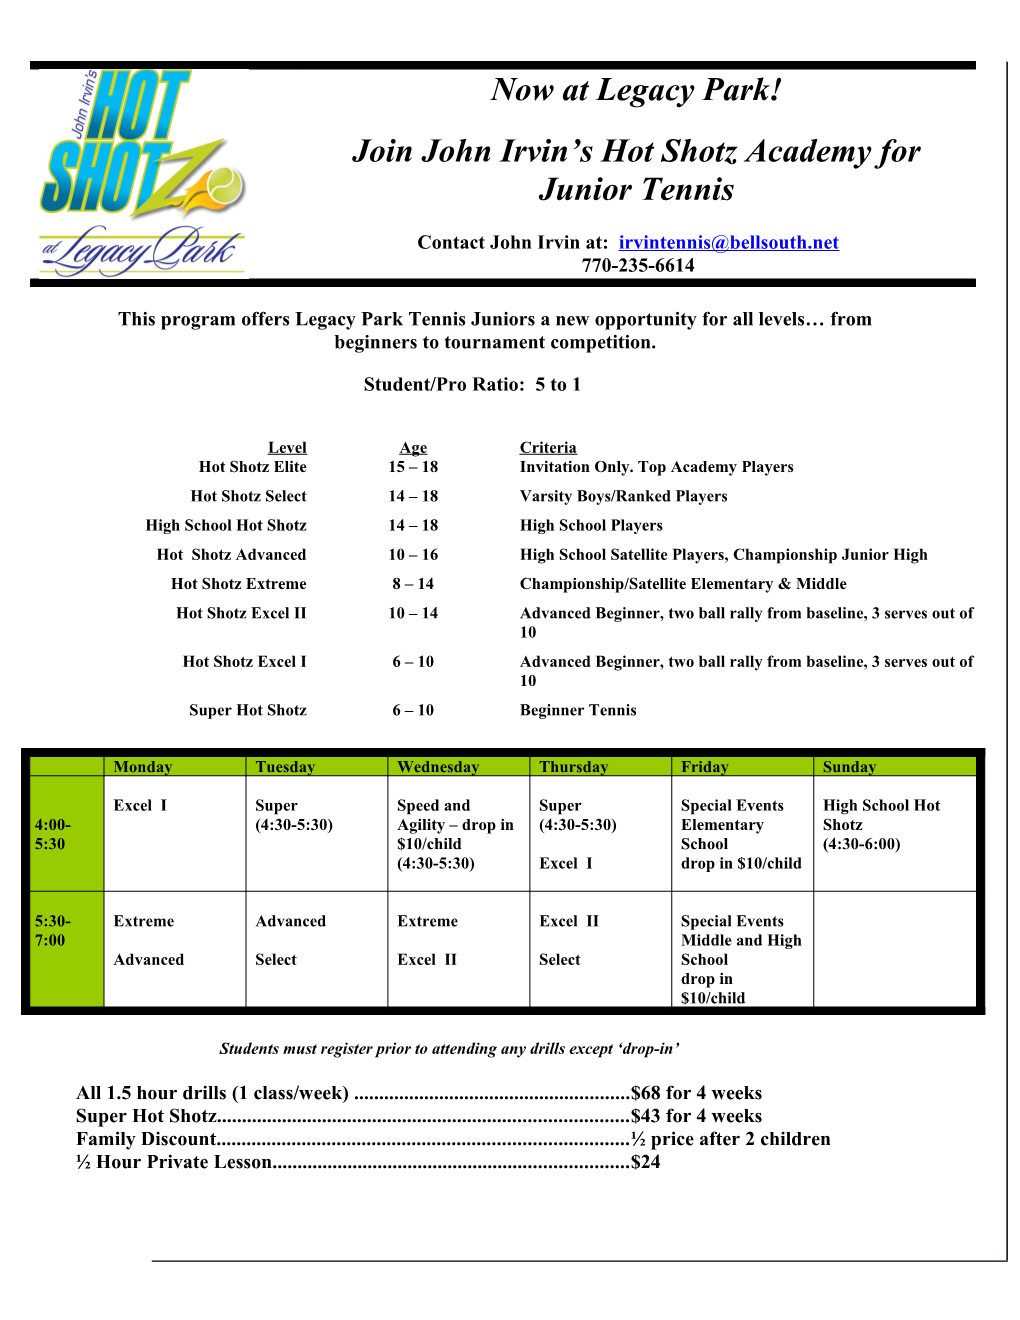 This Program Offers Legacy Park Tennis Juniors a New Opportunity for All Levels from Beginners